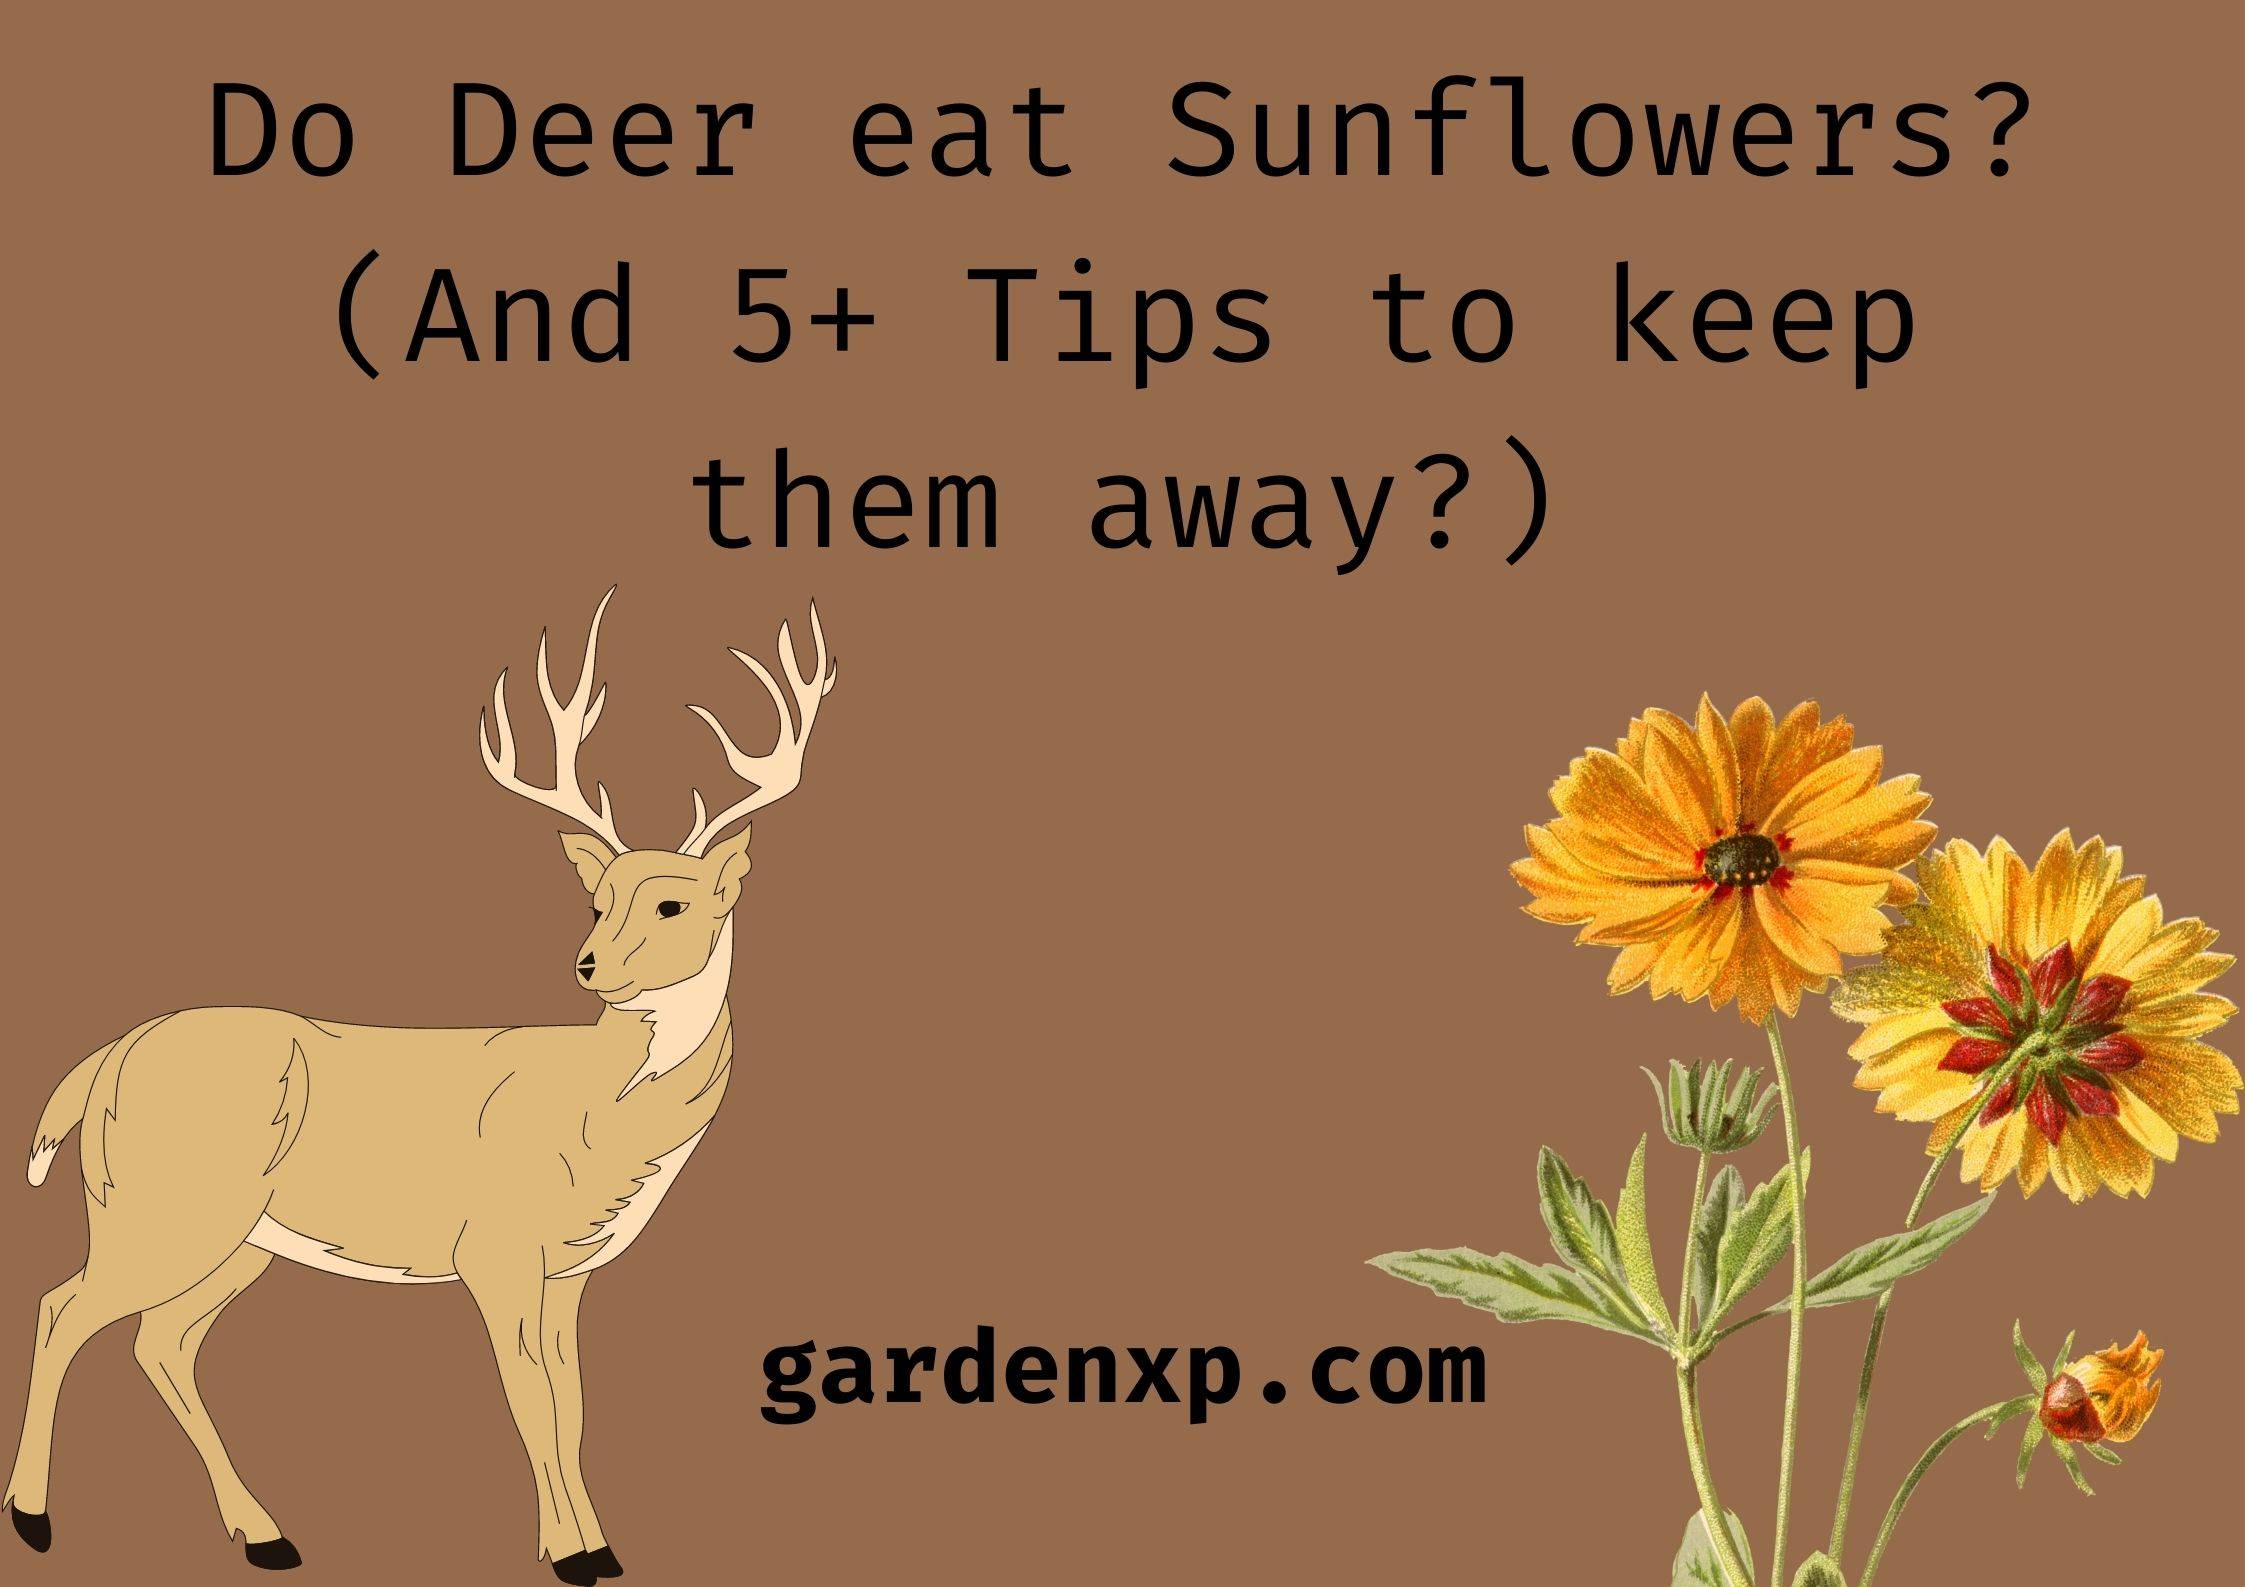 Do Deer eat Sunflowers? (And 5+ Tips to keep them away?)